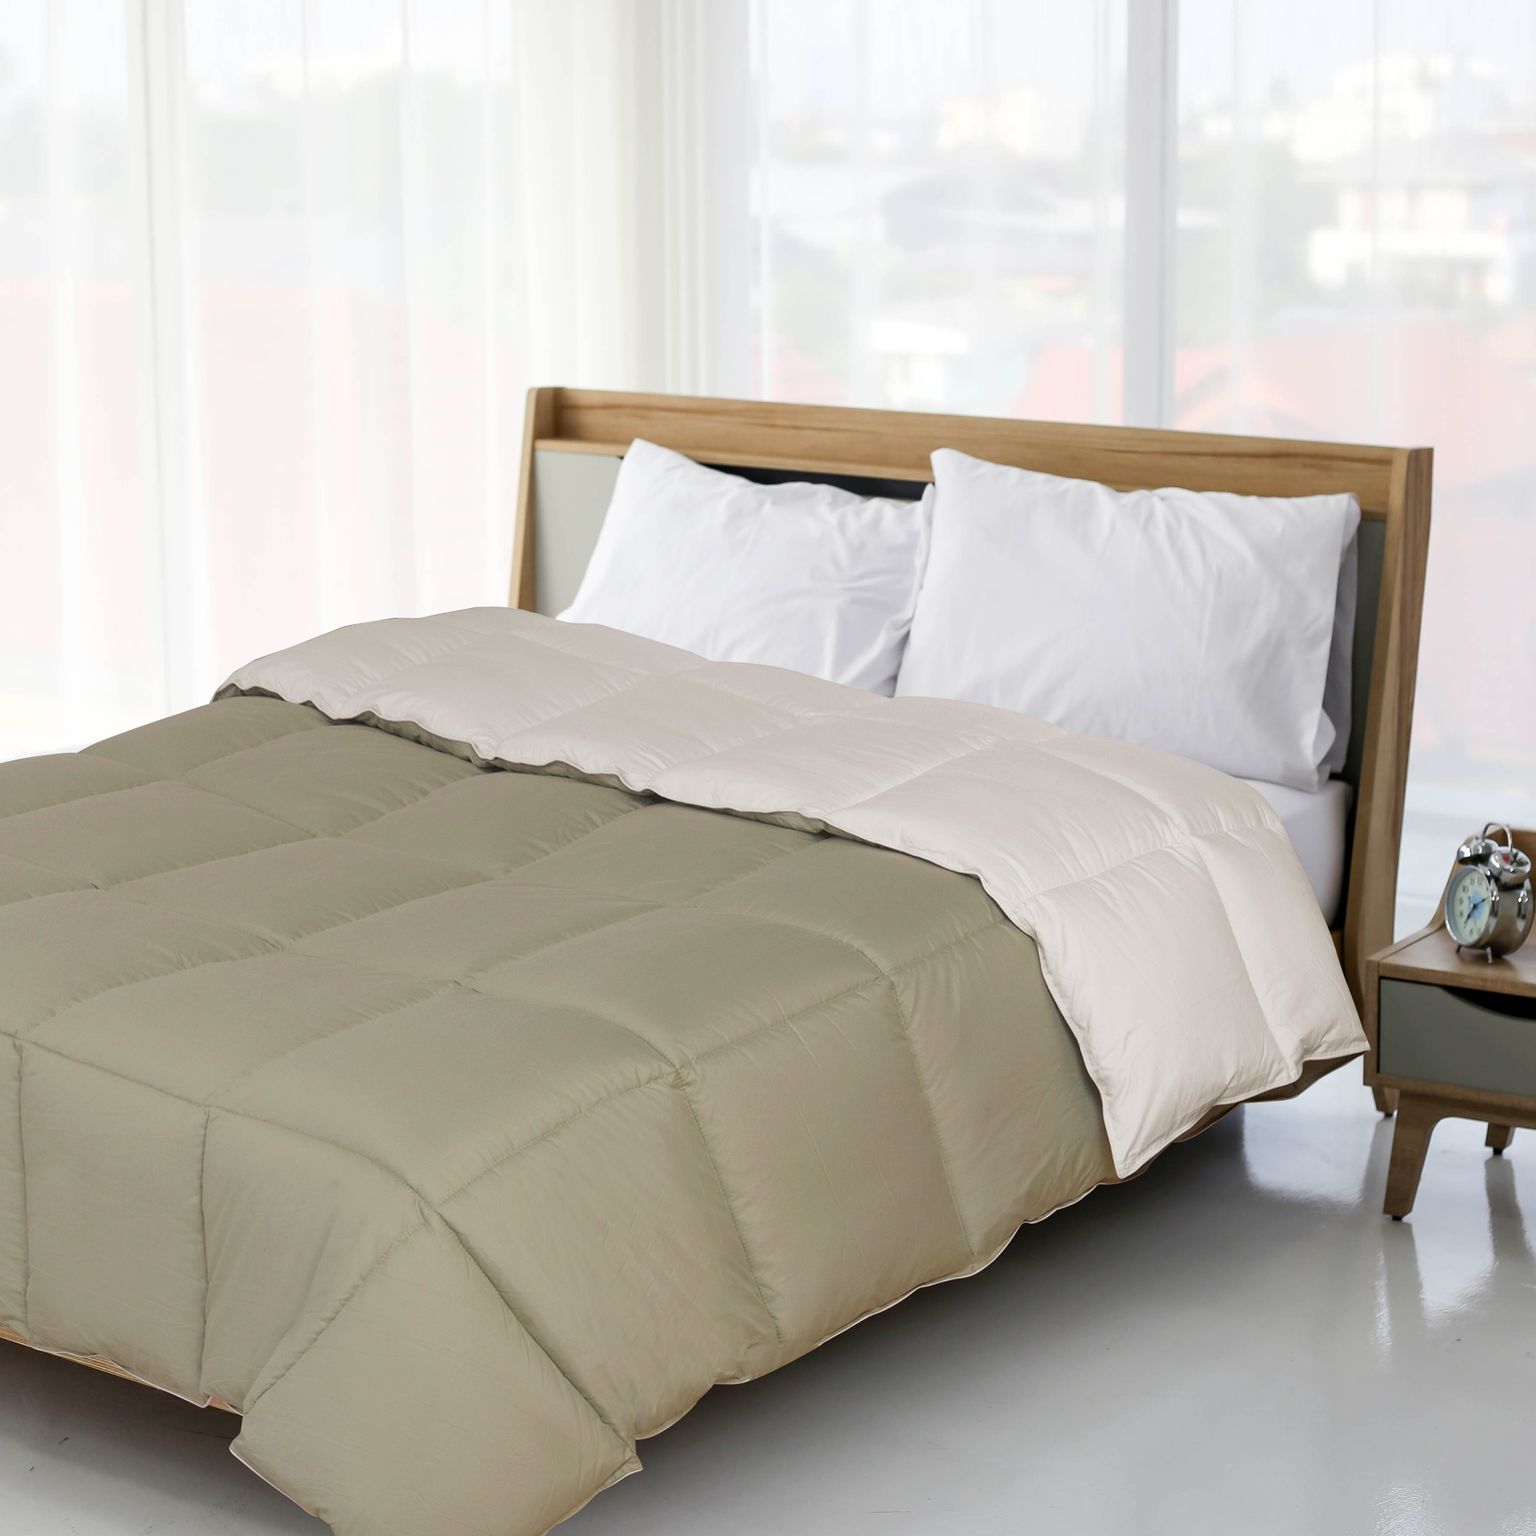 Superior Down Alternative Reversible Comforter, Twin/ Twin XL, Ivory/ Sage - image 2 of 4